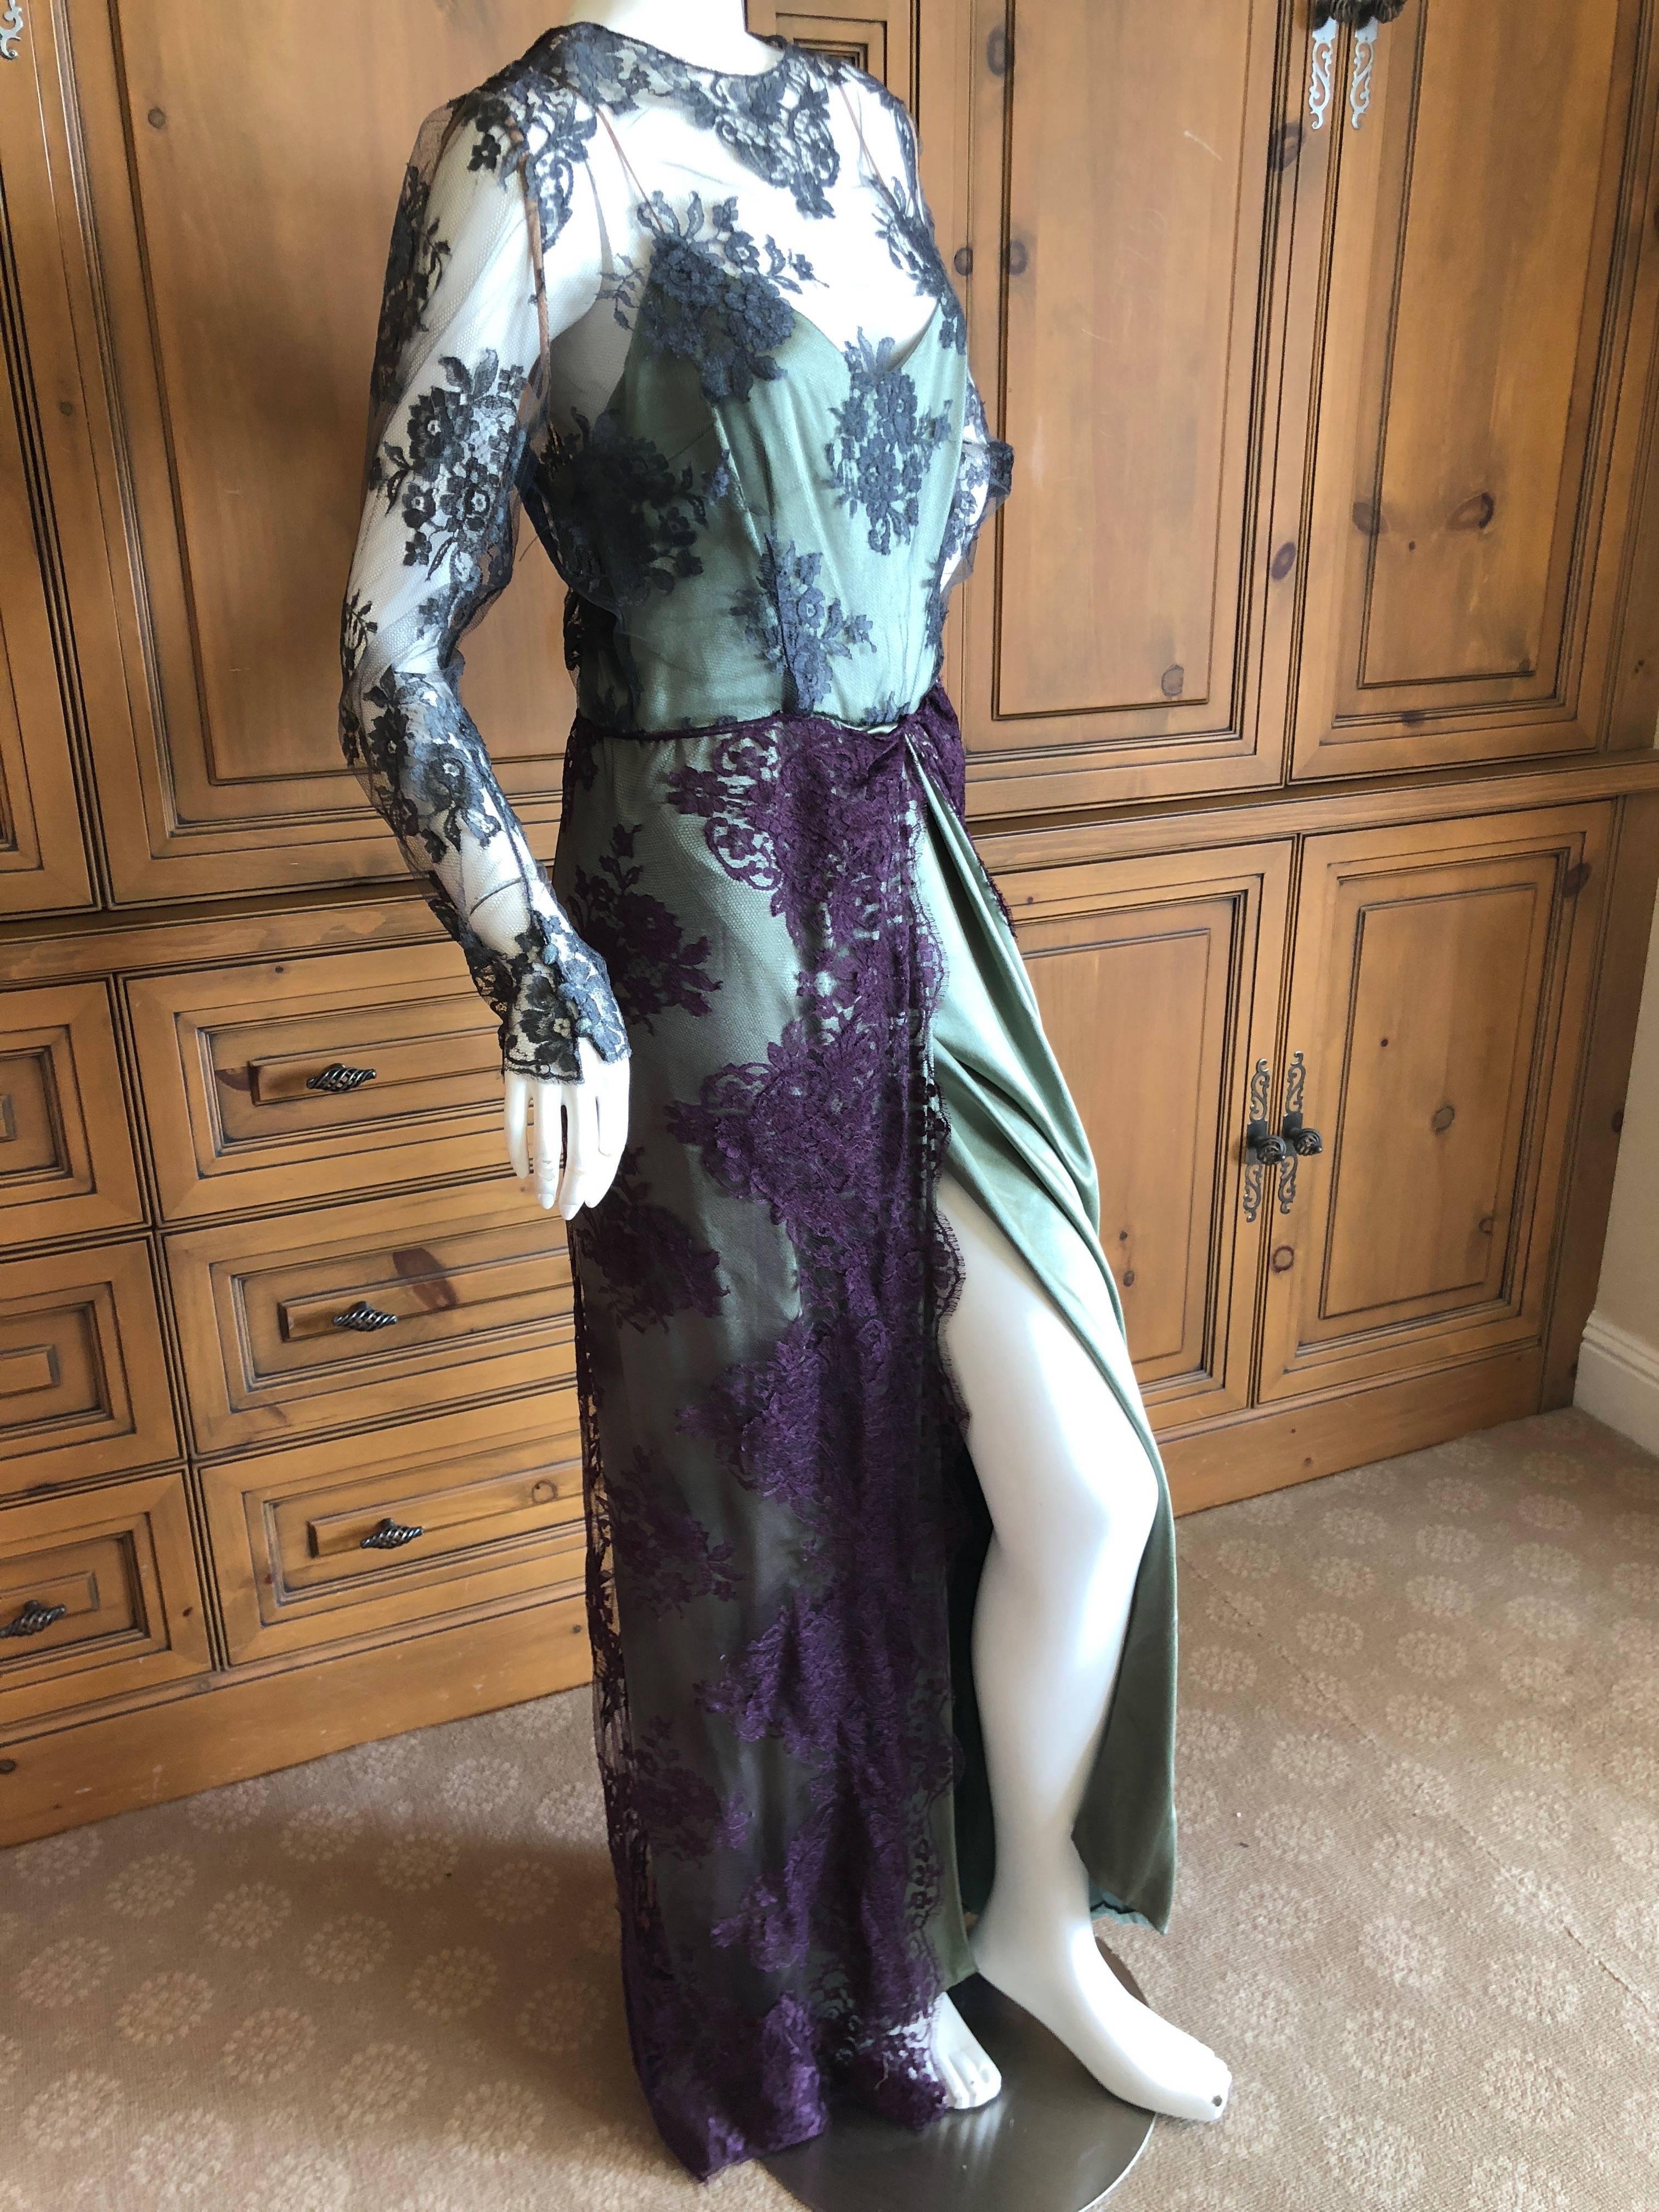 Bill Blass Vintage 1970's Silk Evening Dress with Lace Overlay Details In Excellent Condition For Sale In Cloverdale, CA